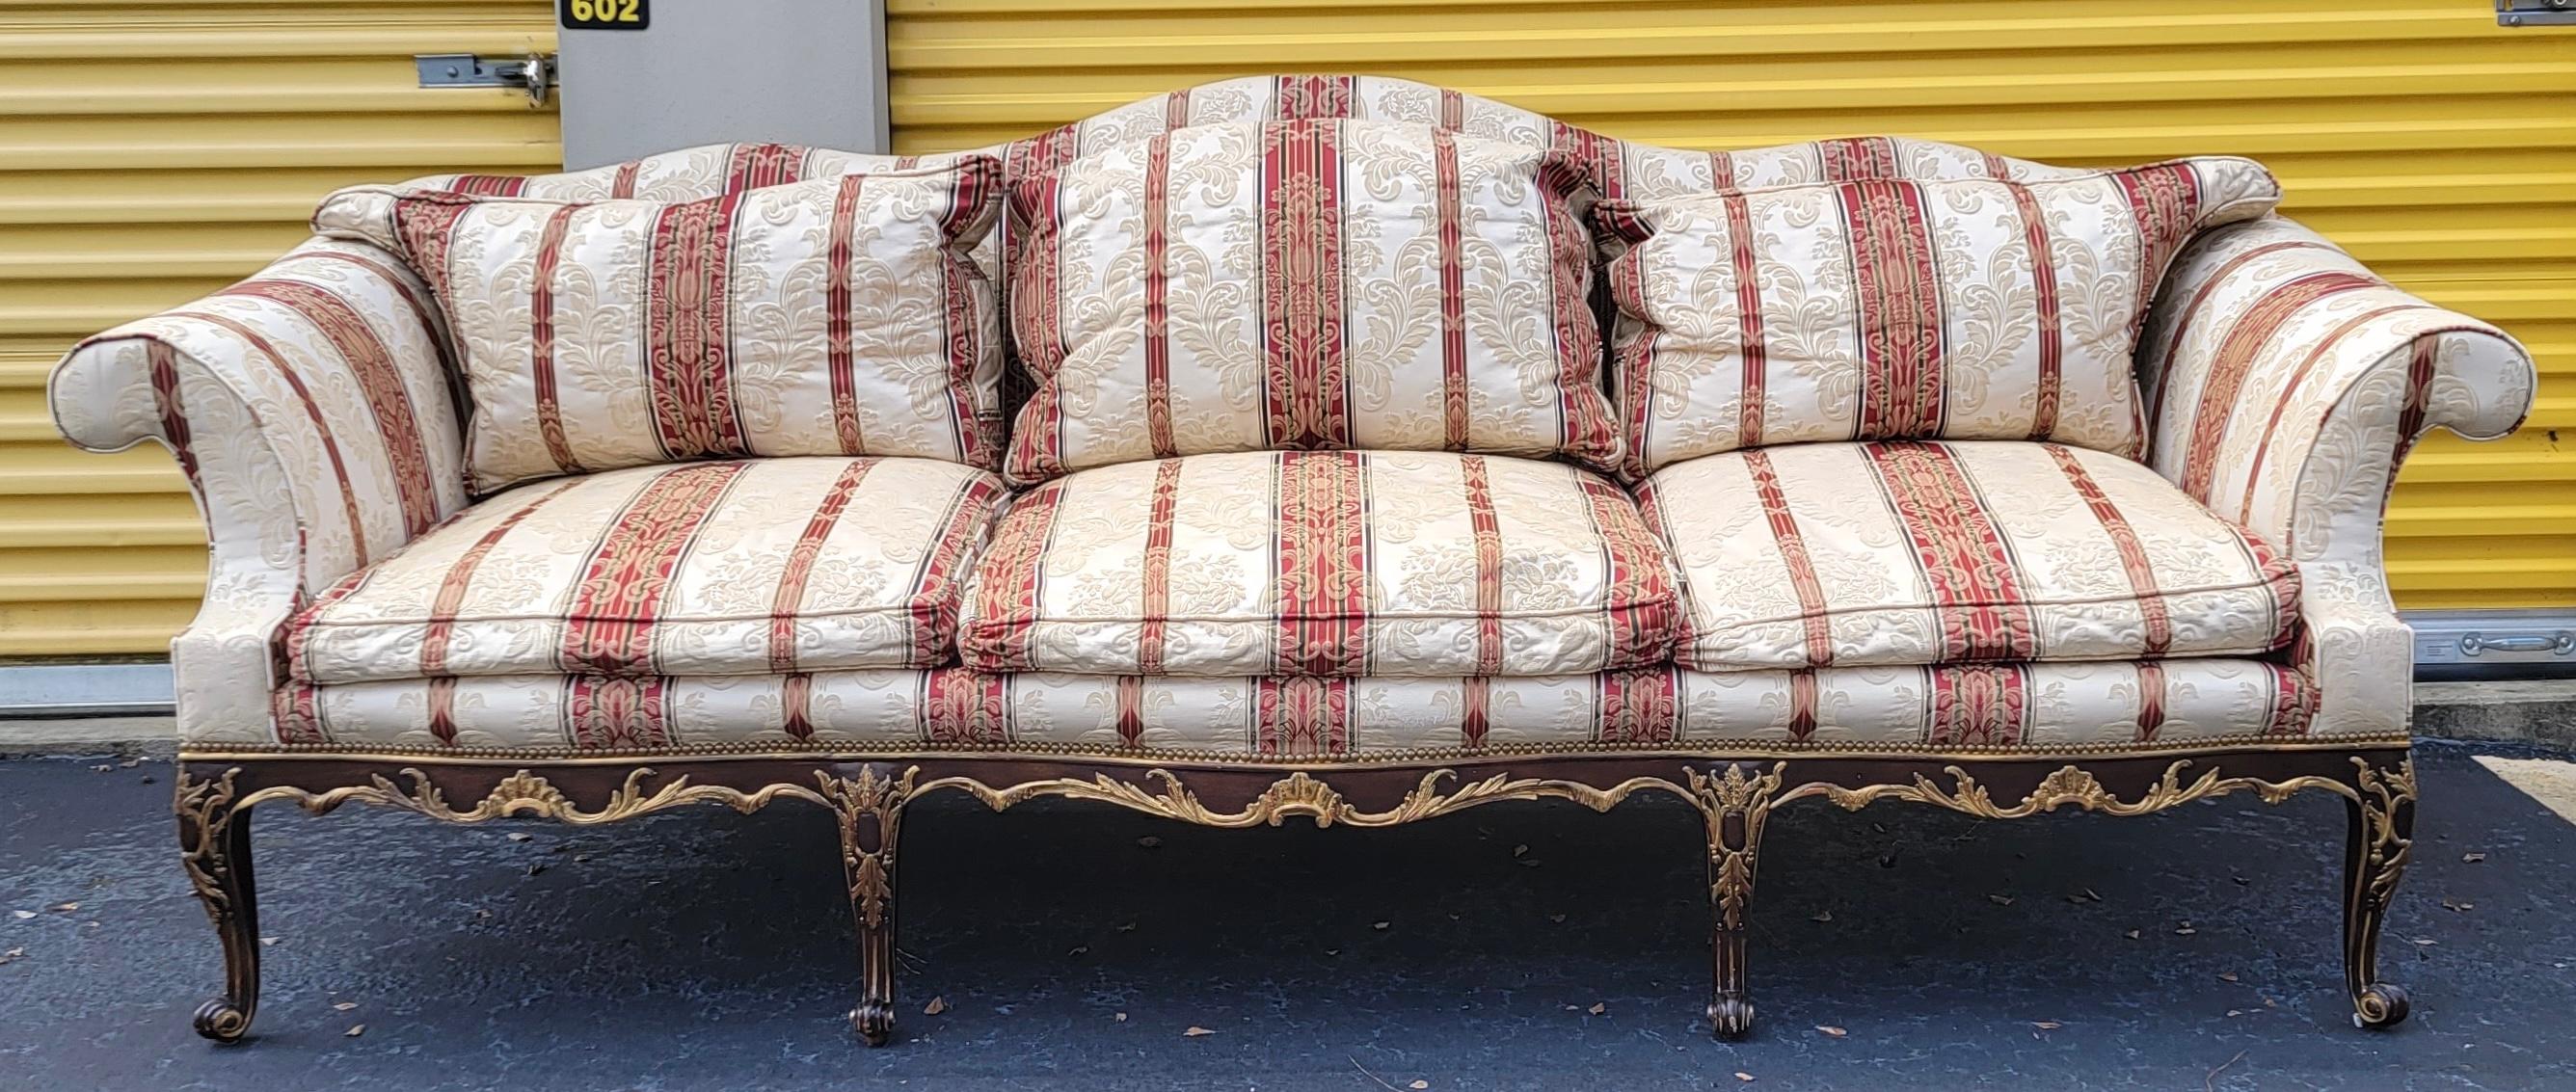 Late 20th-C. French Louis XVI Style Sofa By EJ Victor In Stripe Damask For Sale 3